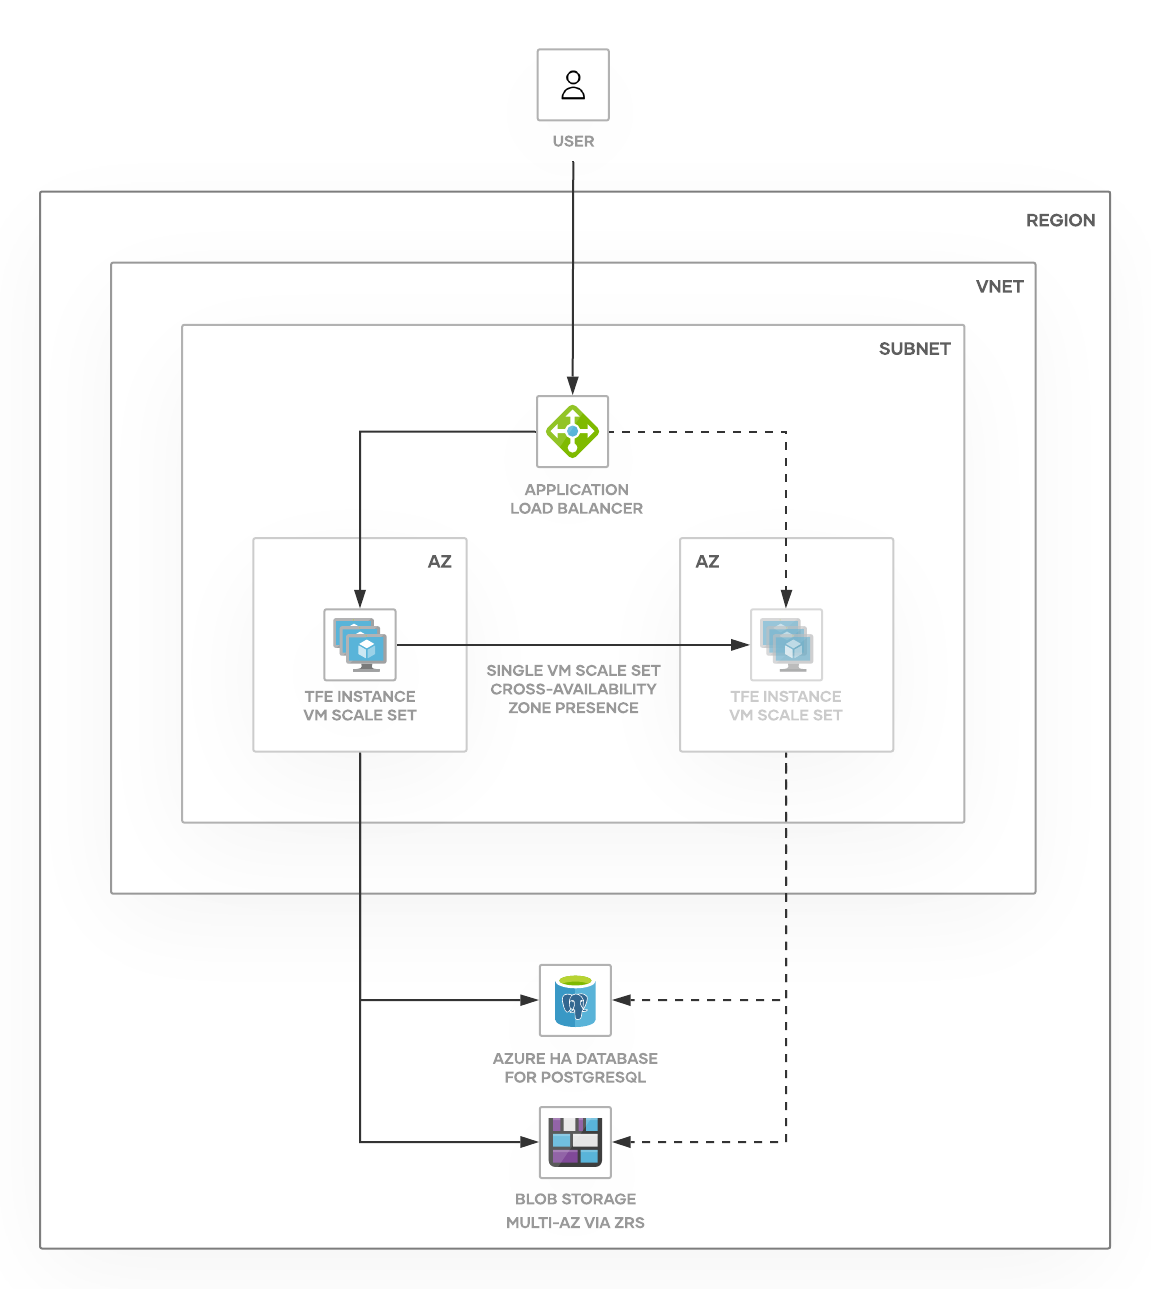 Highly available multi-region web app - Azure Architecture Center